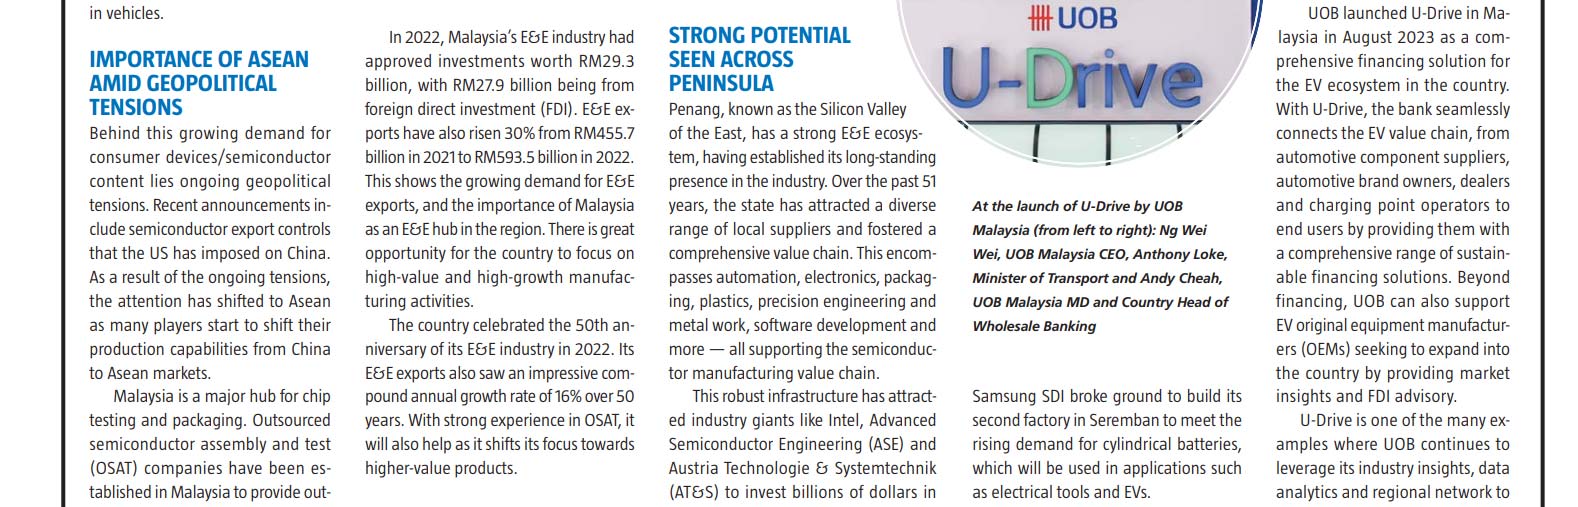 Malaysia is well positioned to support growth in the semiconductor space